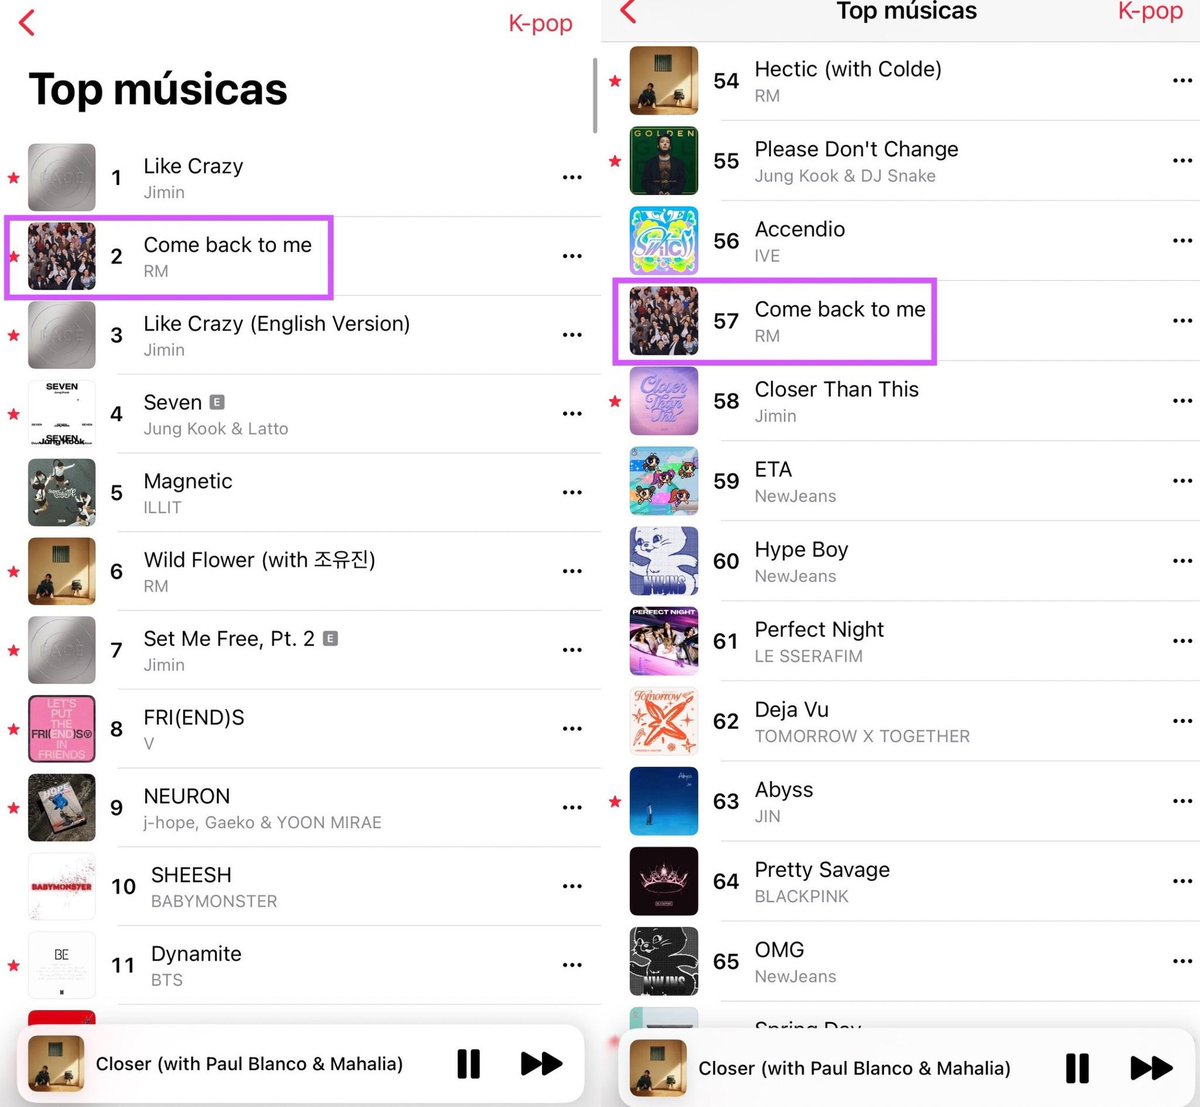 Hello @bts_bighit @BIGHIT_MUSIC @GeffenRecords There are two covers of 'Come back to me' of RM that appear separately on the @AppleMusic charts, despite being the same song. This directly harms the artist's performance on the charts. Solve the problem as quickly as possible.